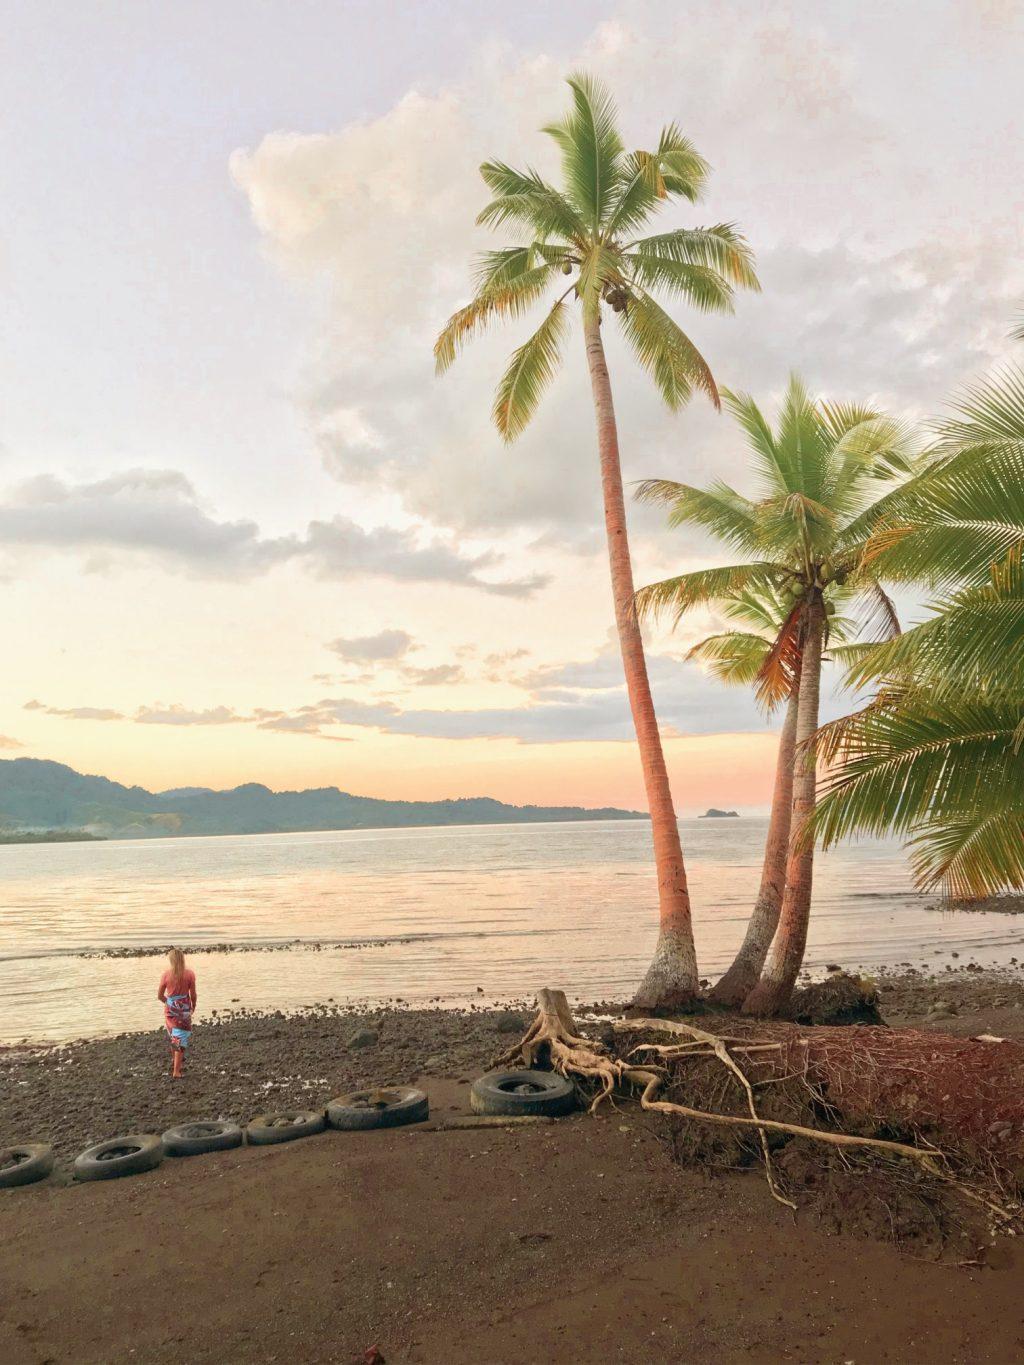 Armstrong walks on the beach on the island of Vanua Levu in Fiji in May 2019. Armstrong said she participated in the Pepperdine Medical and Service Mission in Fiji after spending a year abroad in Argentina.